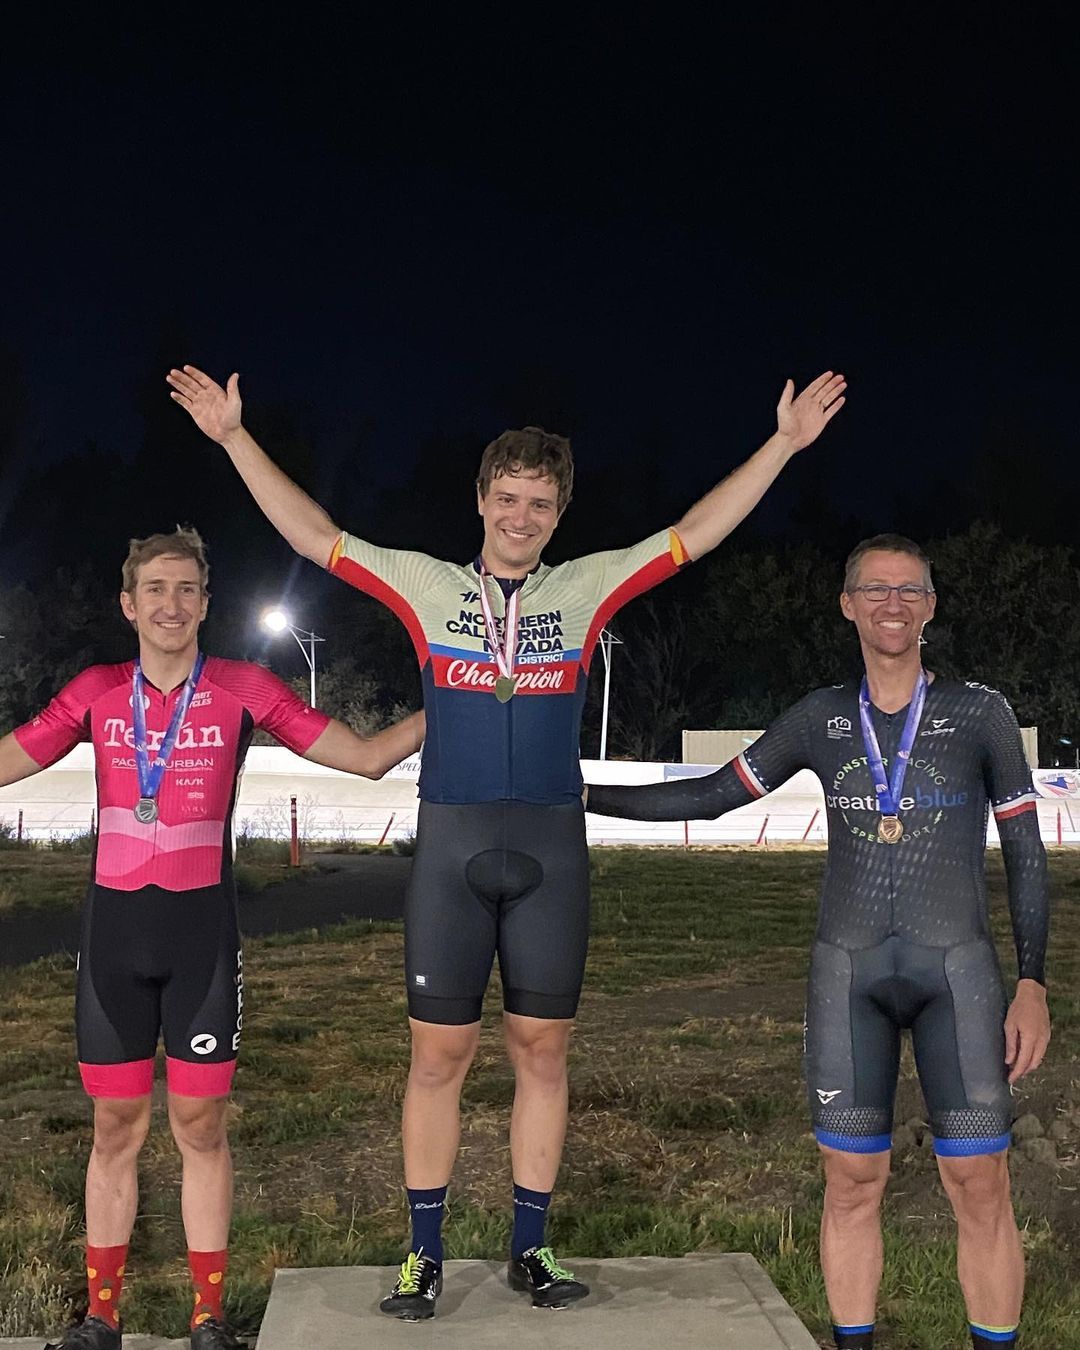 District Champ! Another big win for Stephen Doll on the track! Stephen nabbed 🥇in a super-fast district championship race in the Keirin last night. He also brought home 🥉in the district championship for the Madison. Congrats Stephen! 

@sportful @sfitalianathleticclub @equatorcoffees @poggio_labs @achieveptc @tripsforkidsmarin @sage.realestategroup @marinservicecourse @jkbrkb #themenkegeoup #onewealthadvisors